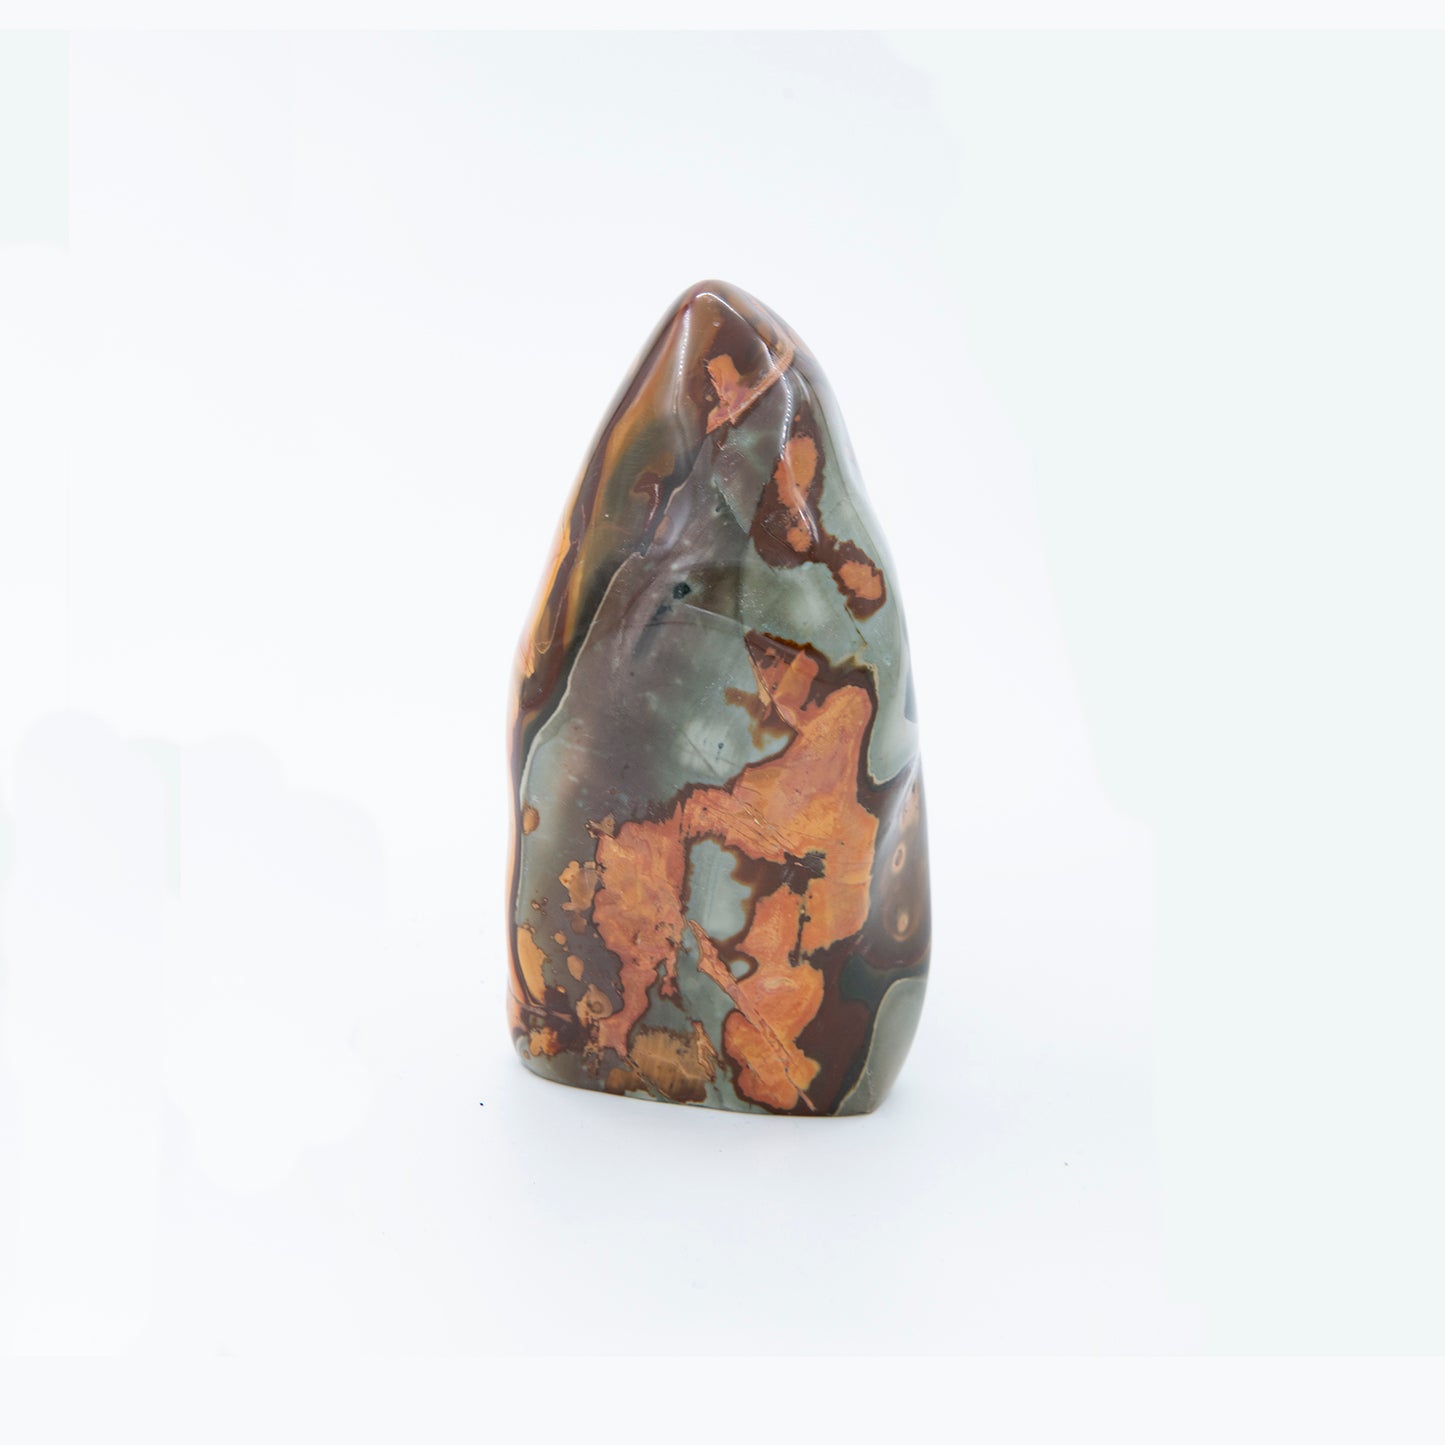 Madagascar Polychrome Jasper.  Beautiful colors and patterns. Size: 9 inches tall and 3 inches wide.  Shamans call this a stone of stability and grounding.